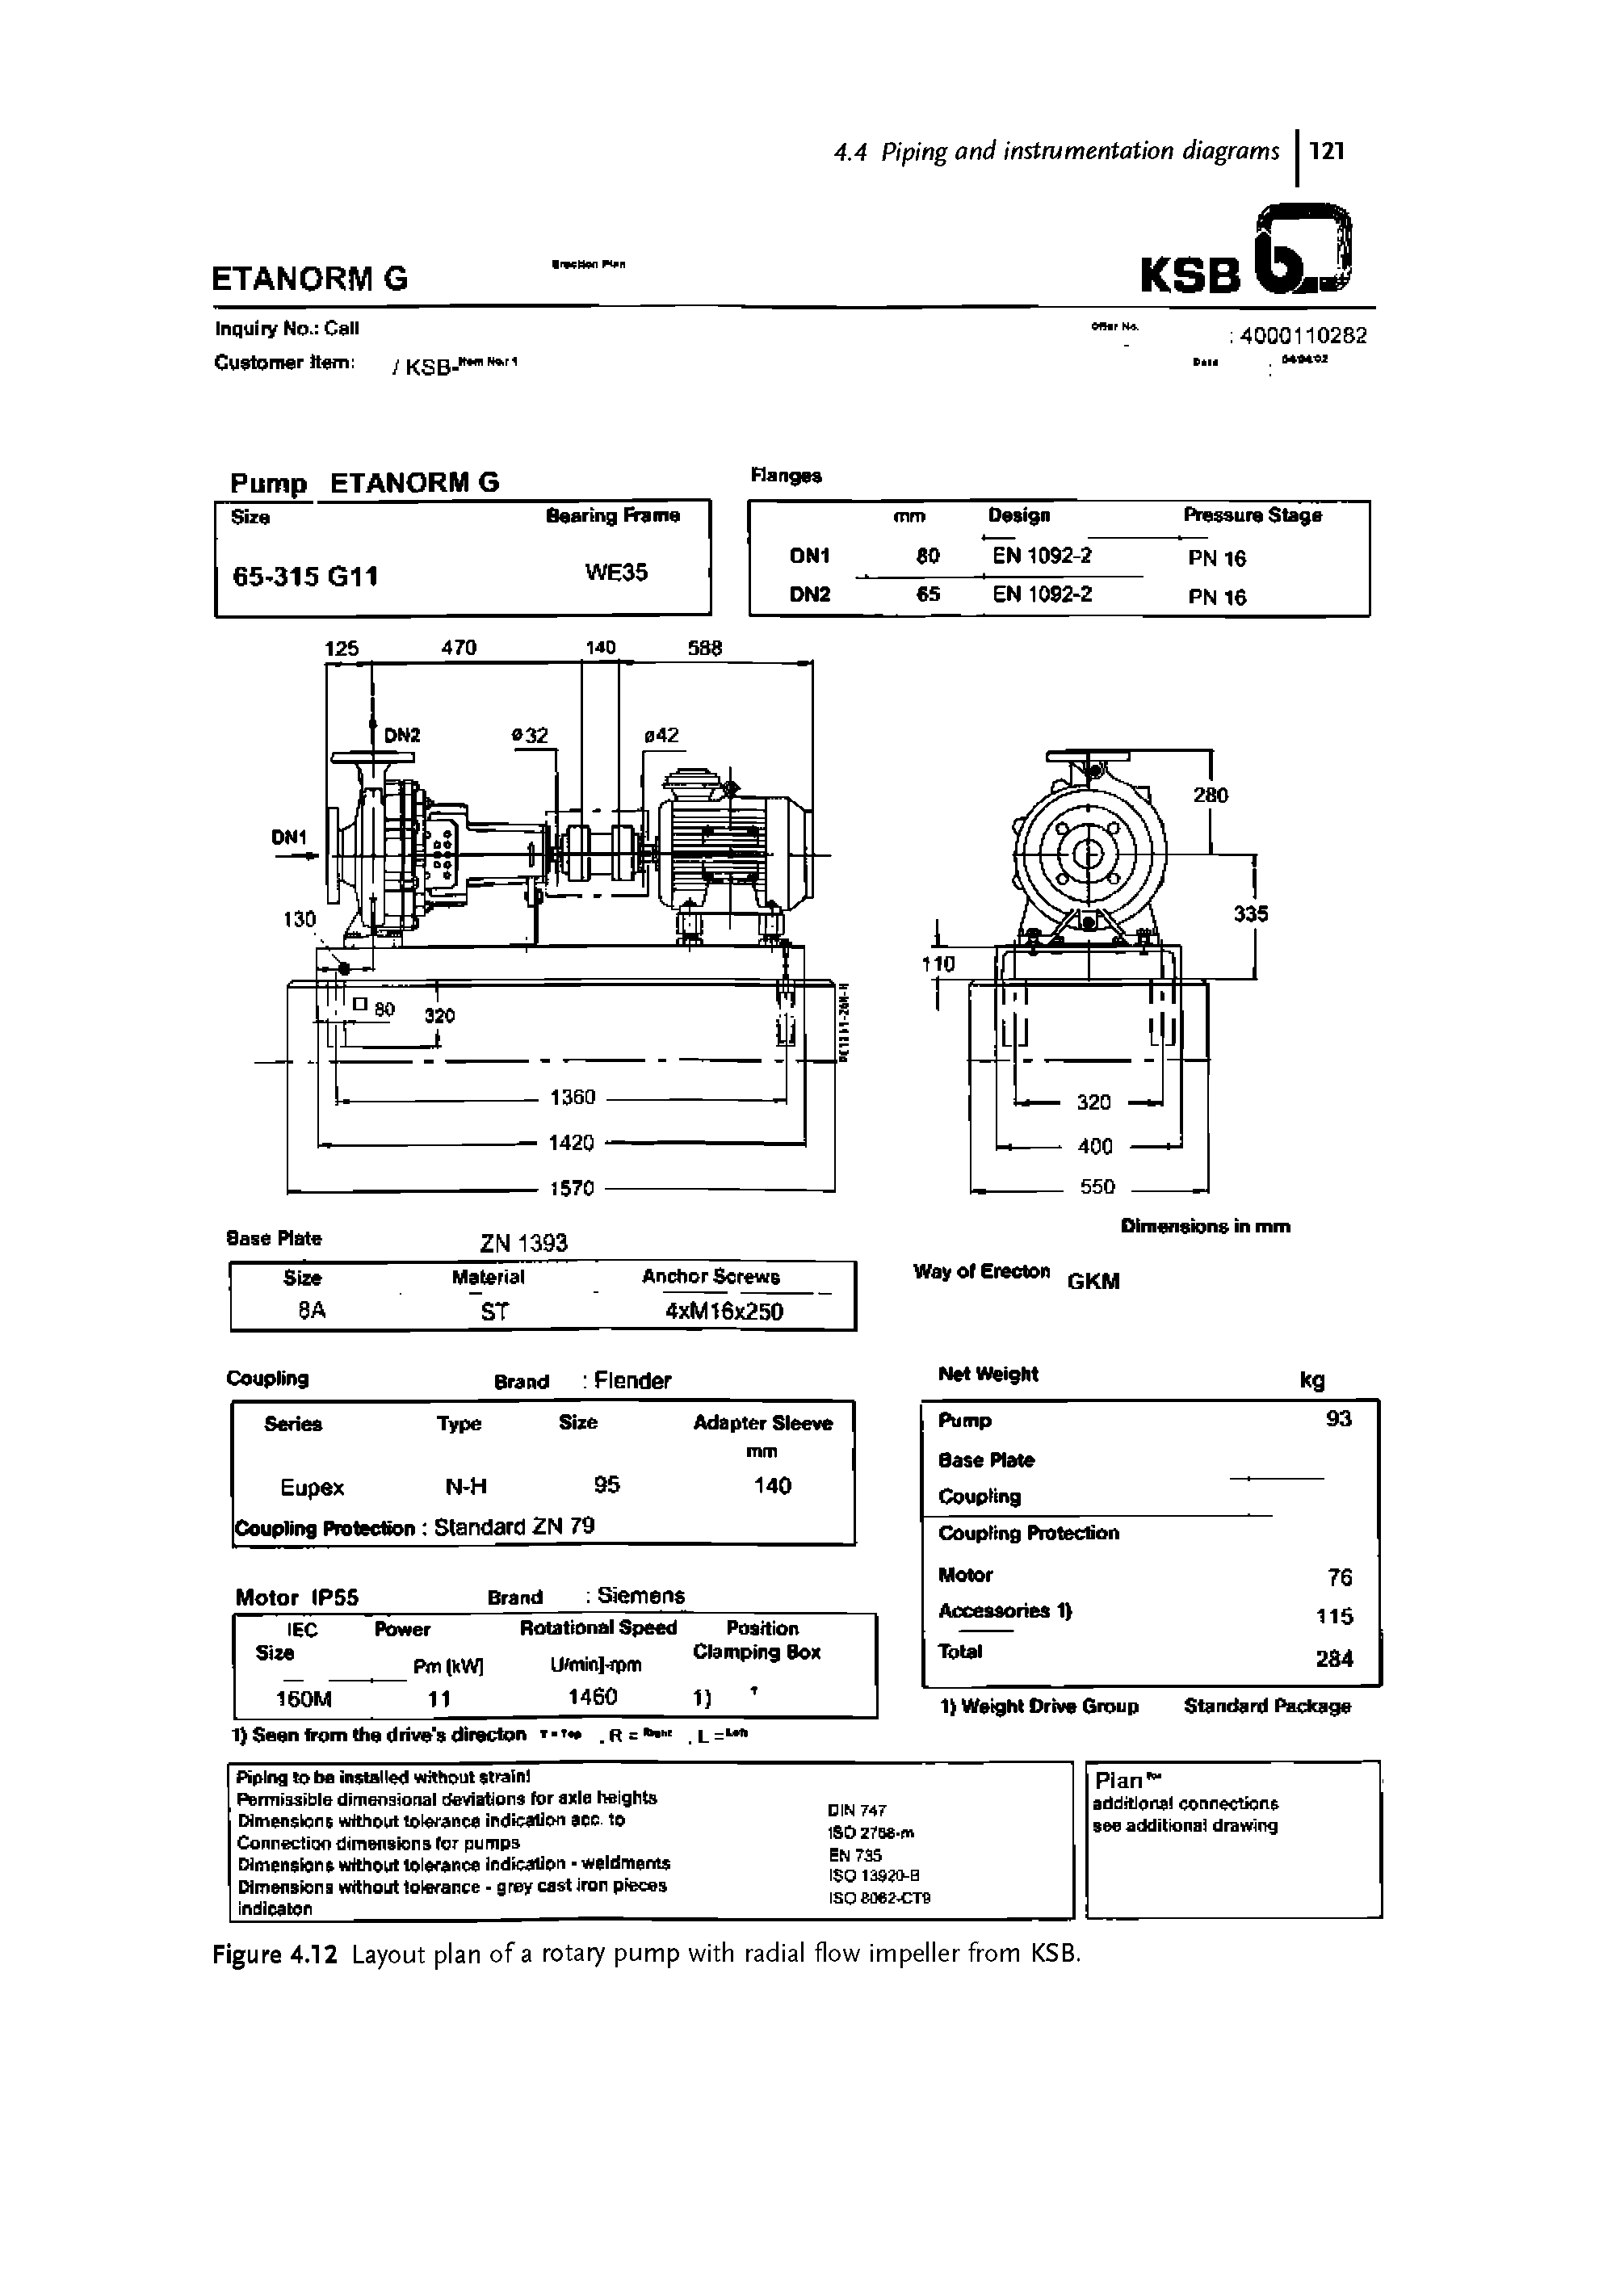 Figure 4.12 Layout plan of a rotary pump with radial flow impeller from KSB.